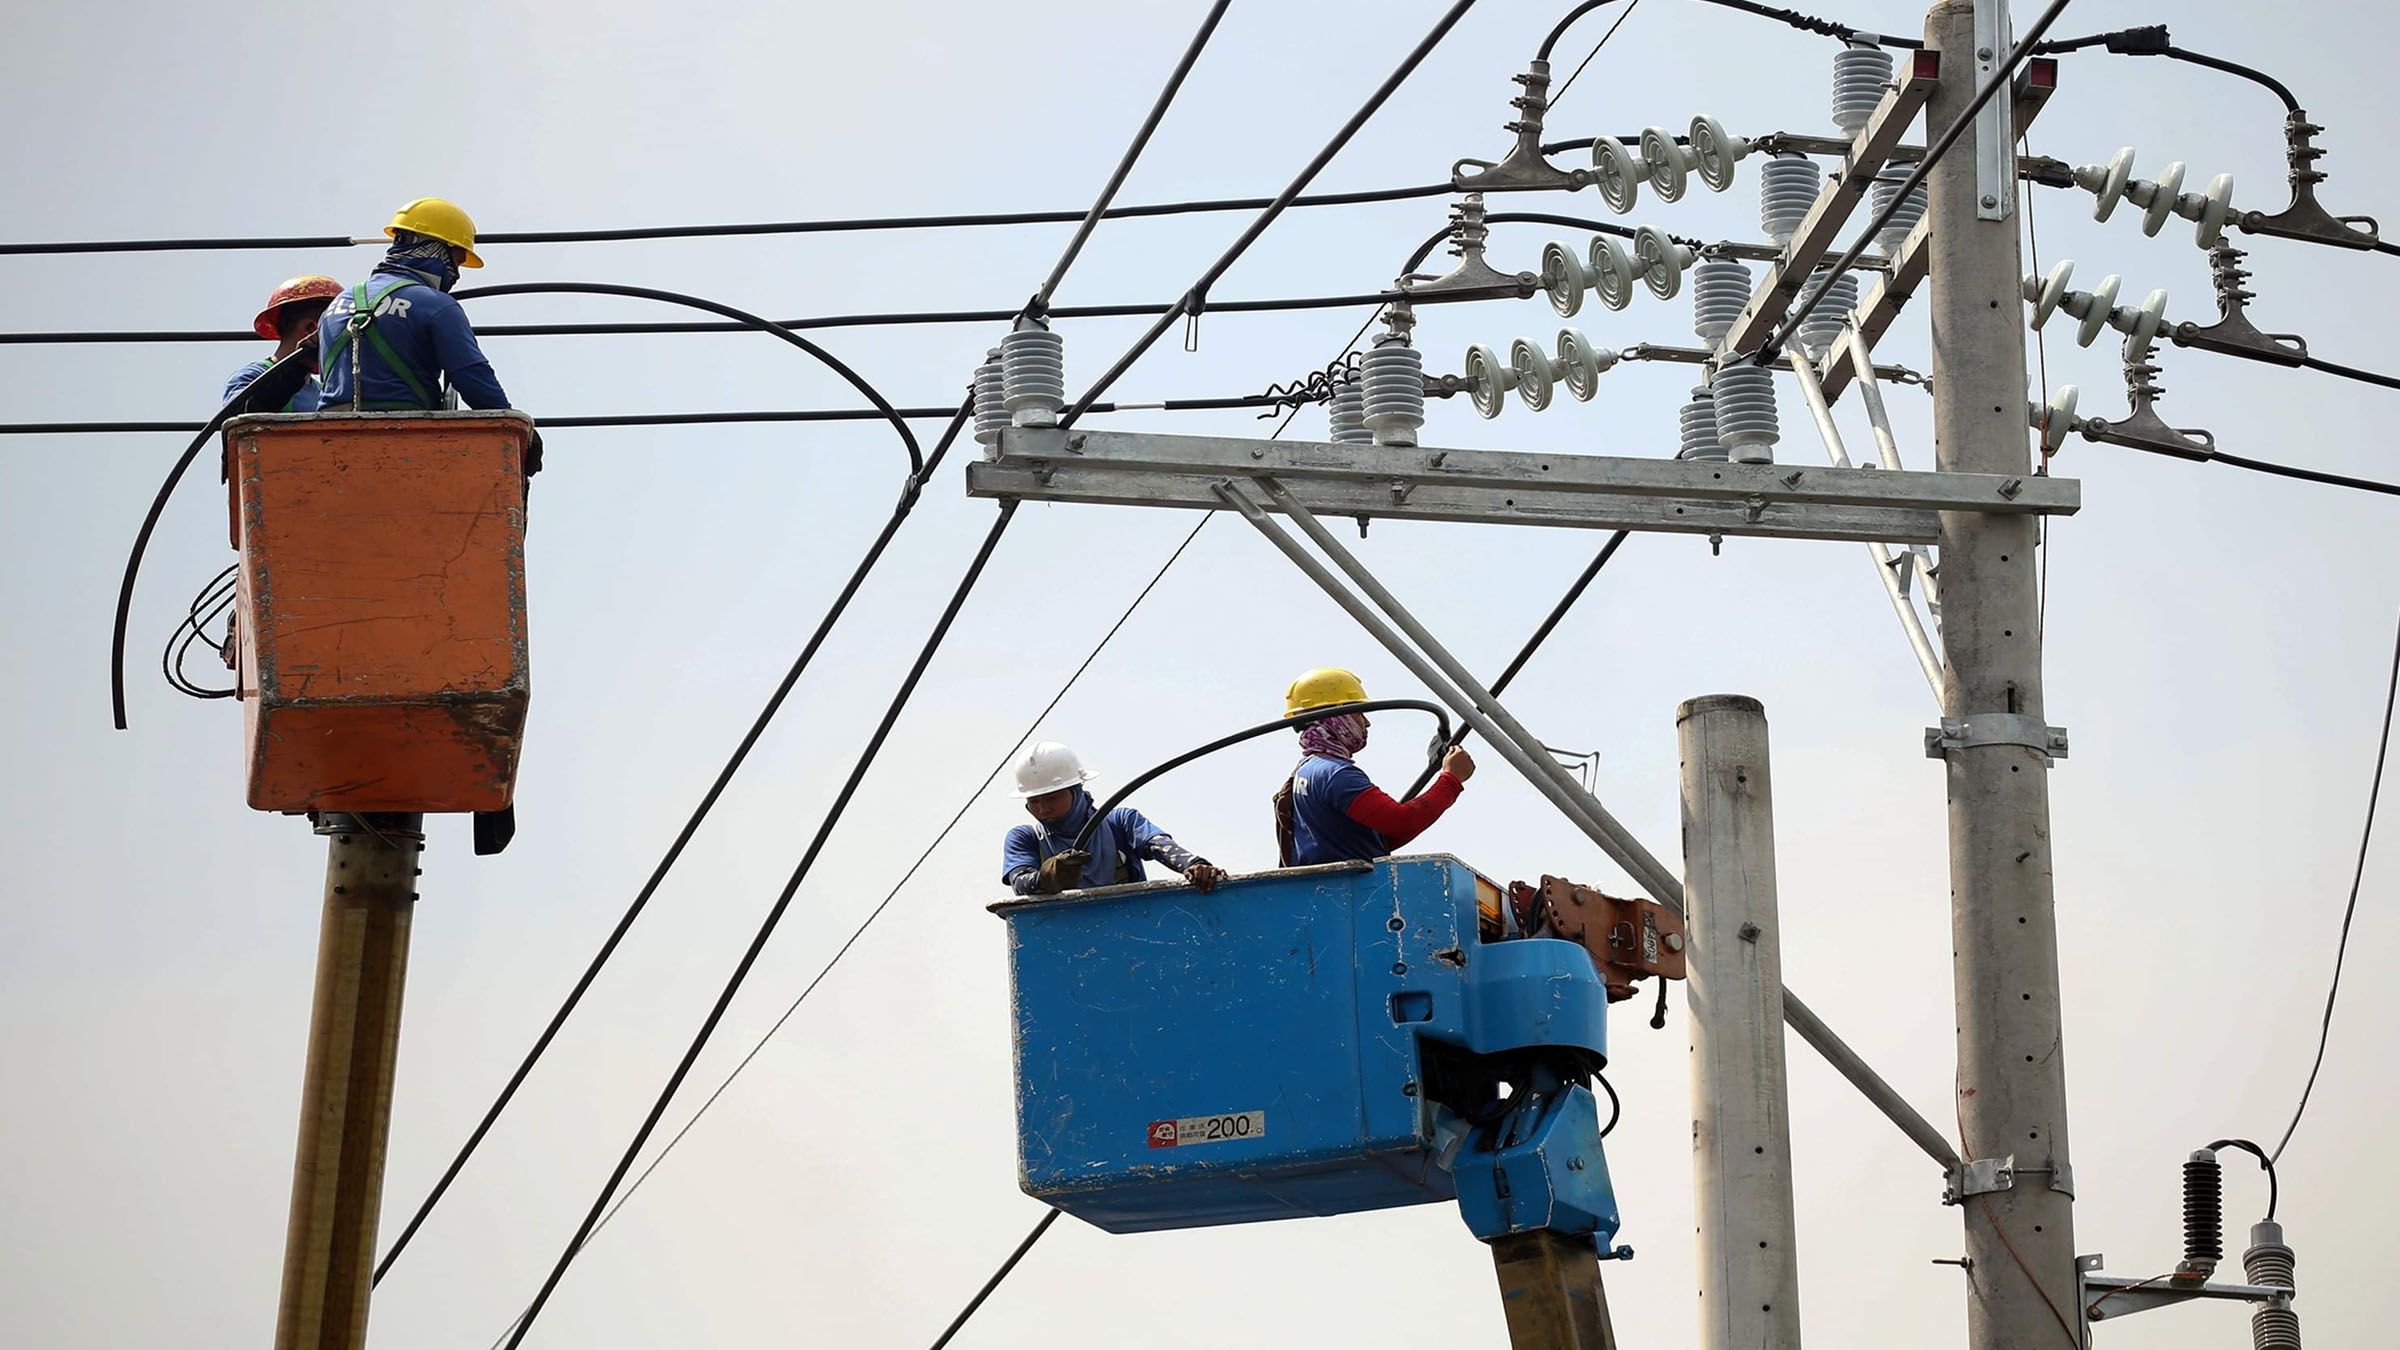 DoE says Luzon power supply sufficient, for now